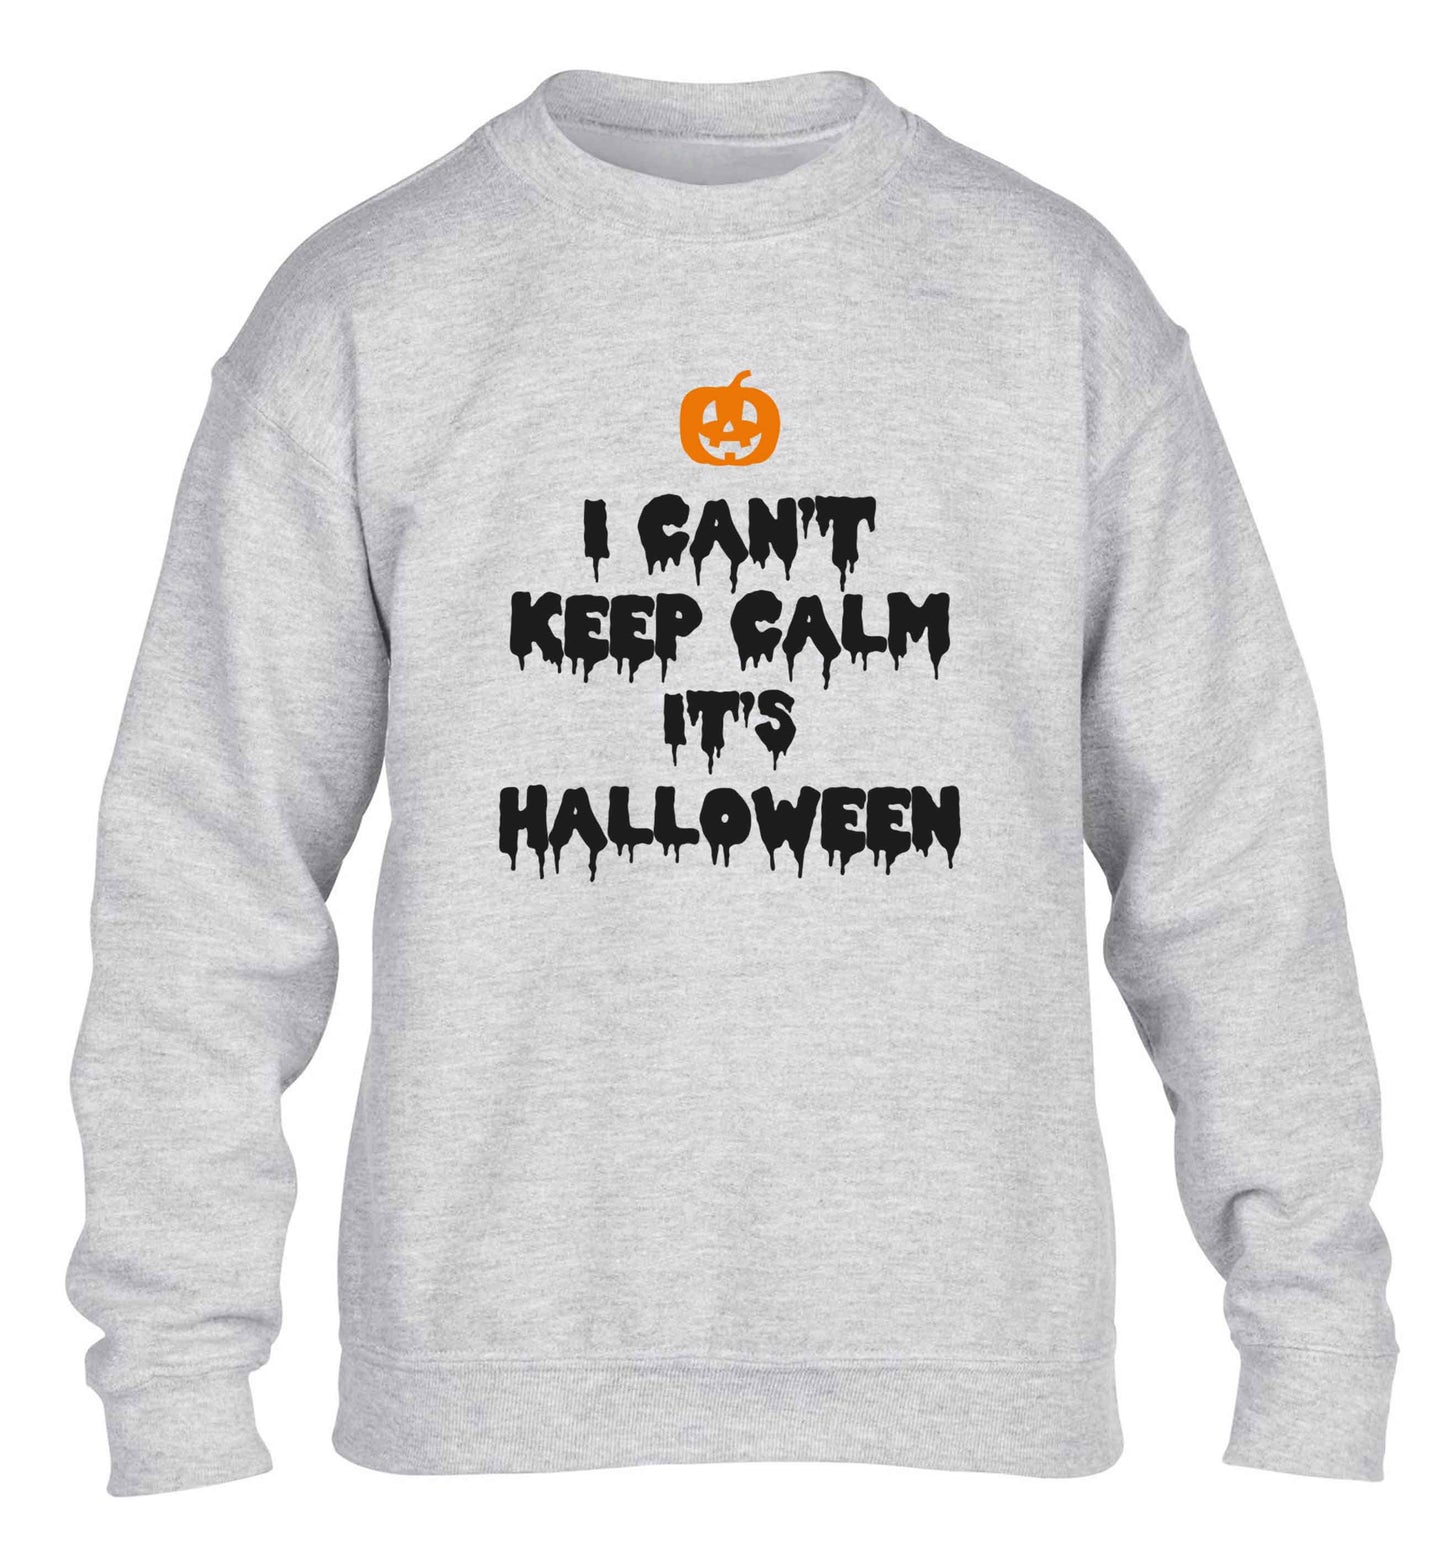 I can't keep calm it's halloween children's grey sweater 12-13 Years